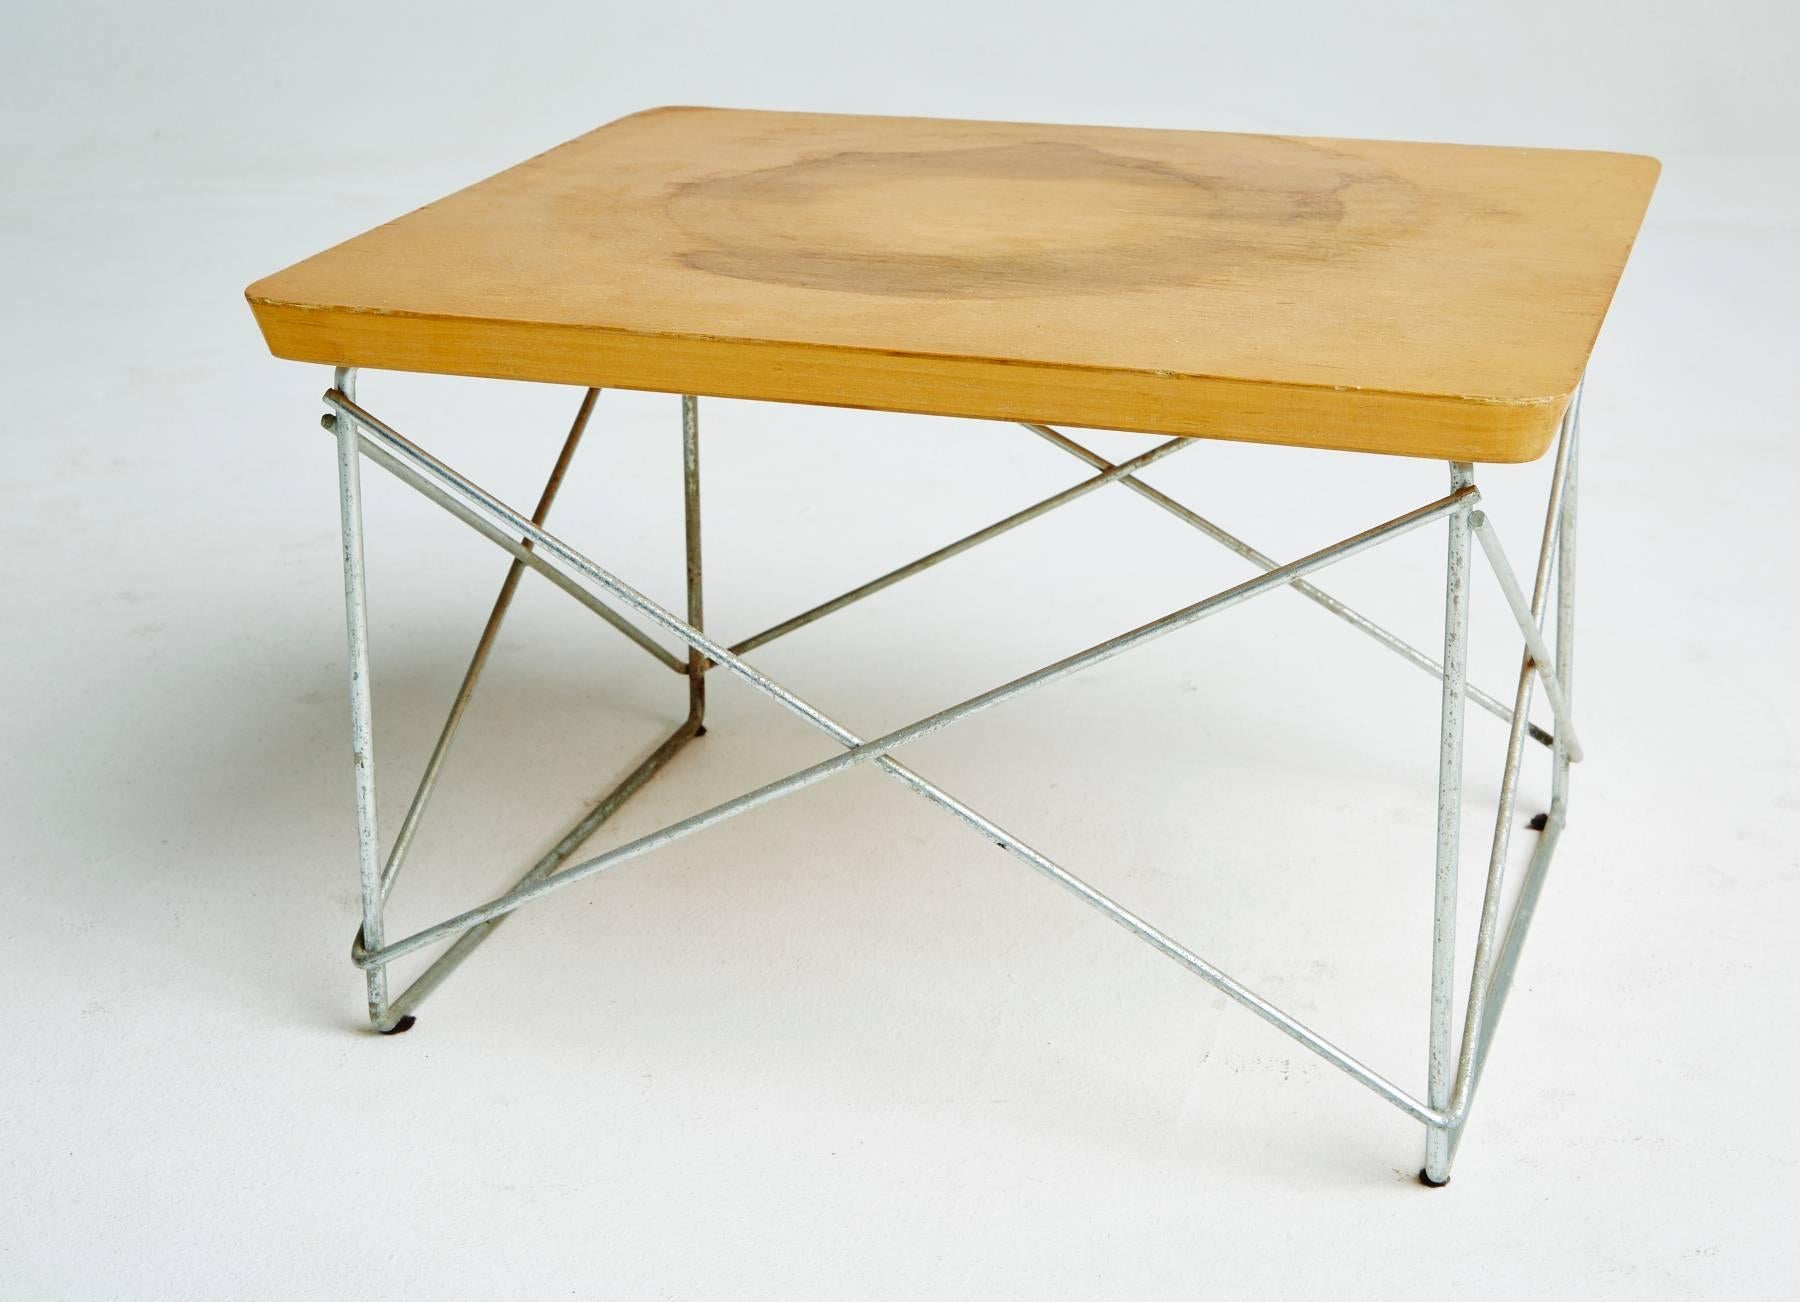 American 1950s Birch LTR Tables by Eames for Herman Miller, Early Production, Signed